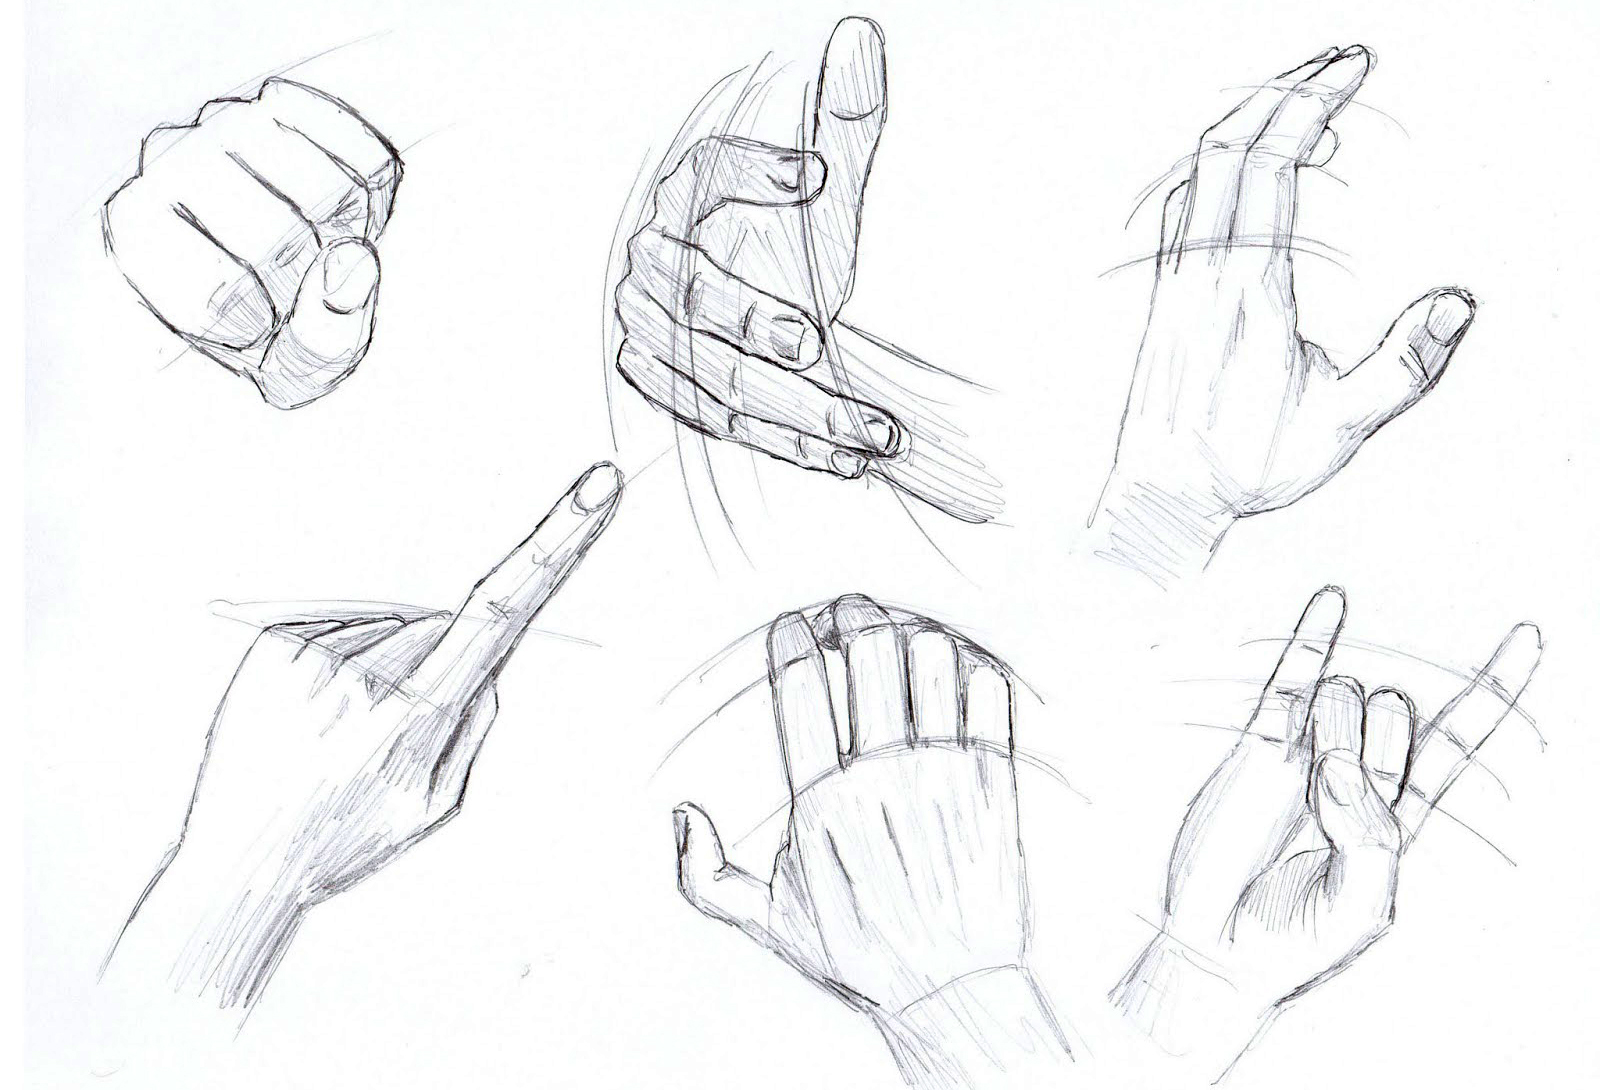 How To Draw Hands Poses Quick Reference Liron Yanconsky Submitted 4 days ago by stargazaia. to draw hands poses quick reference